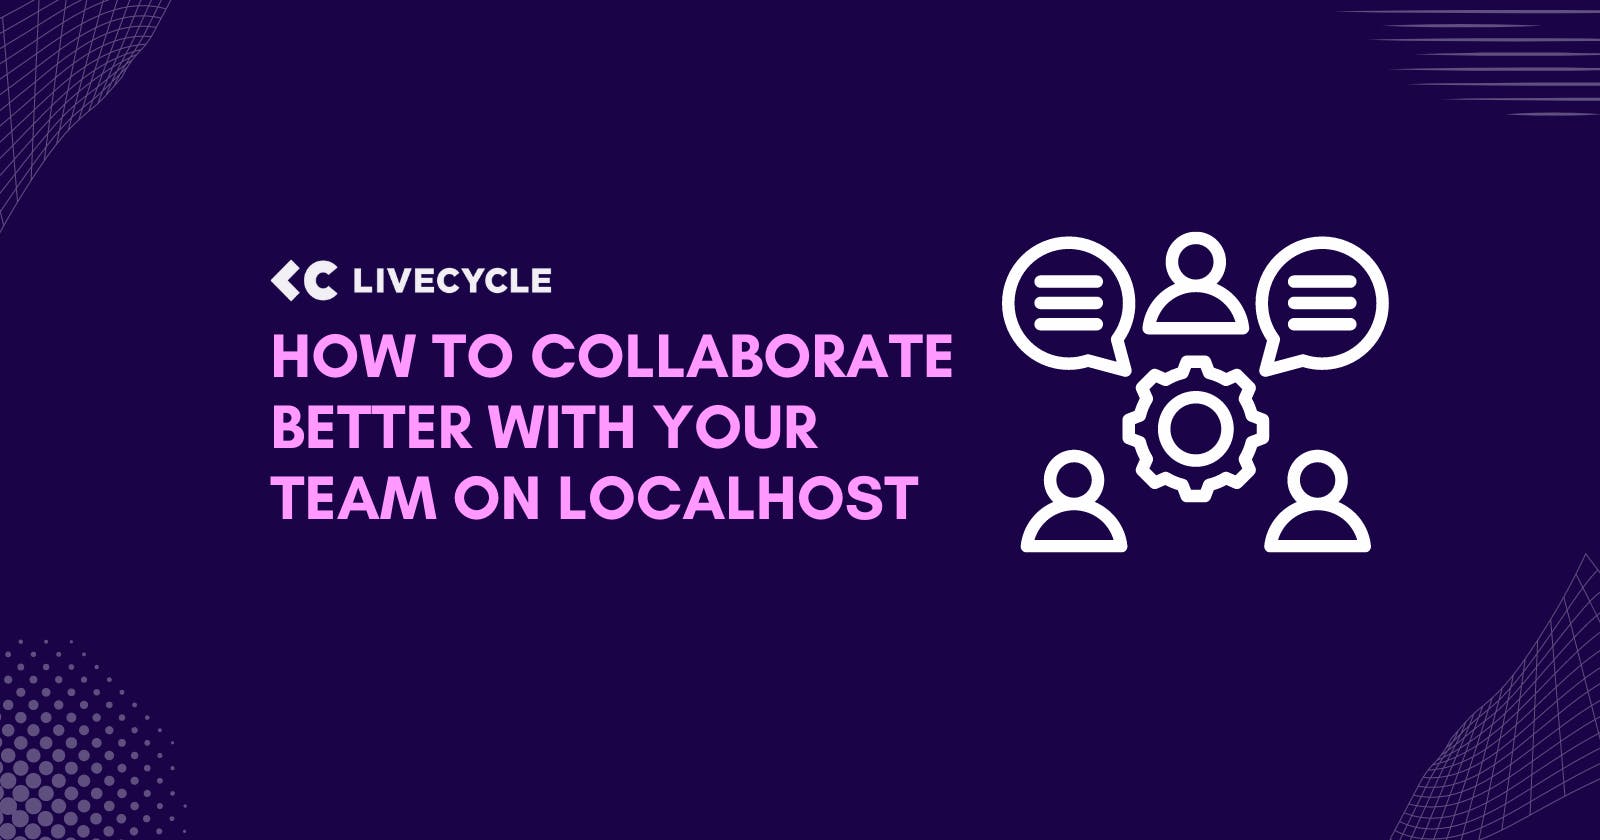 How to collaborate better with your team on Localhost